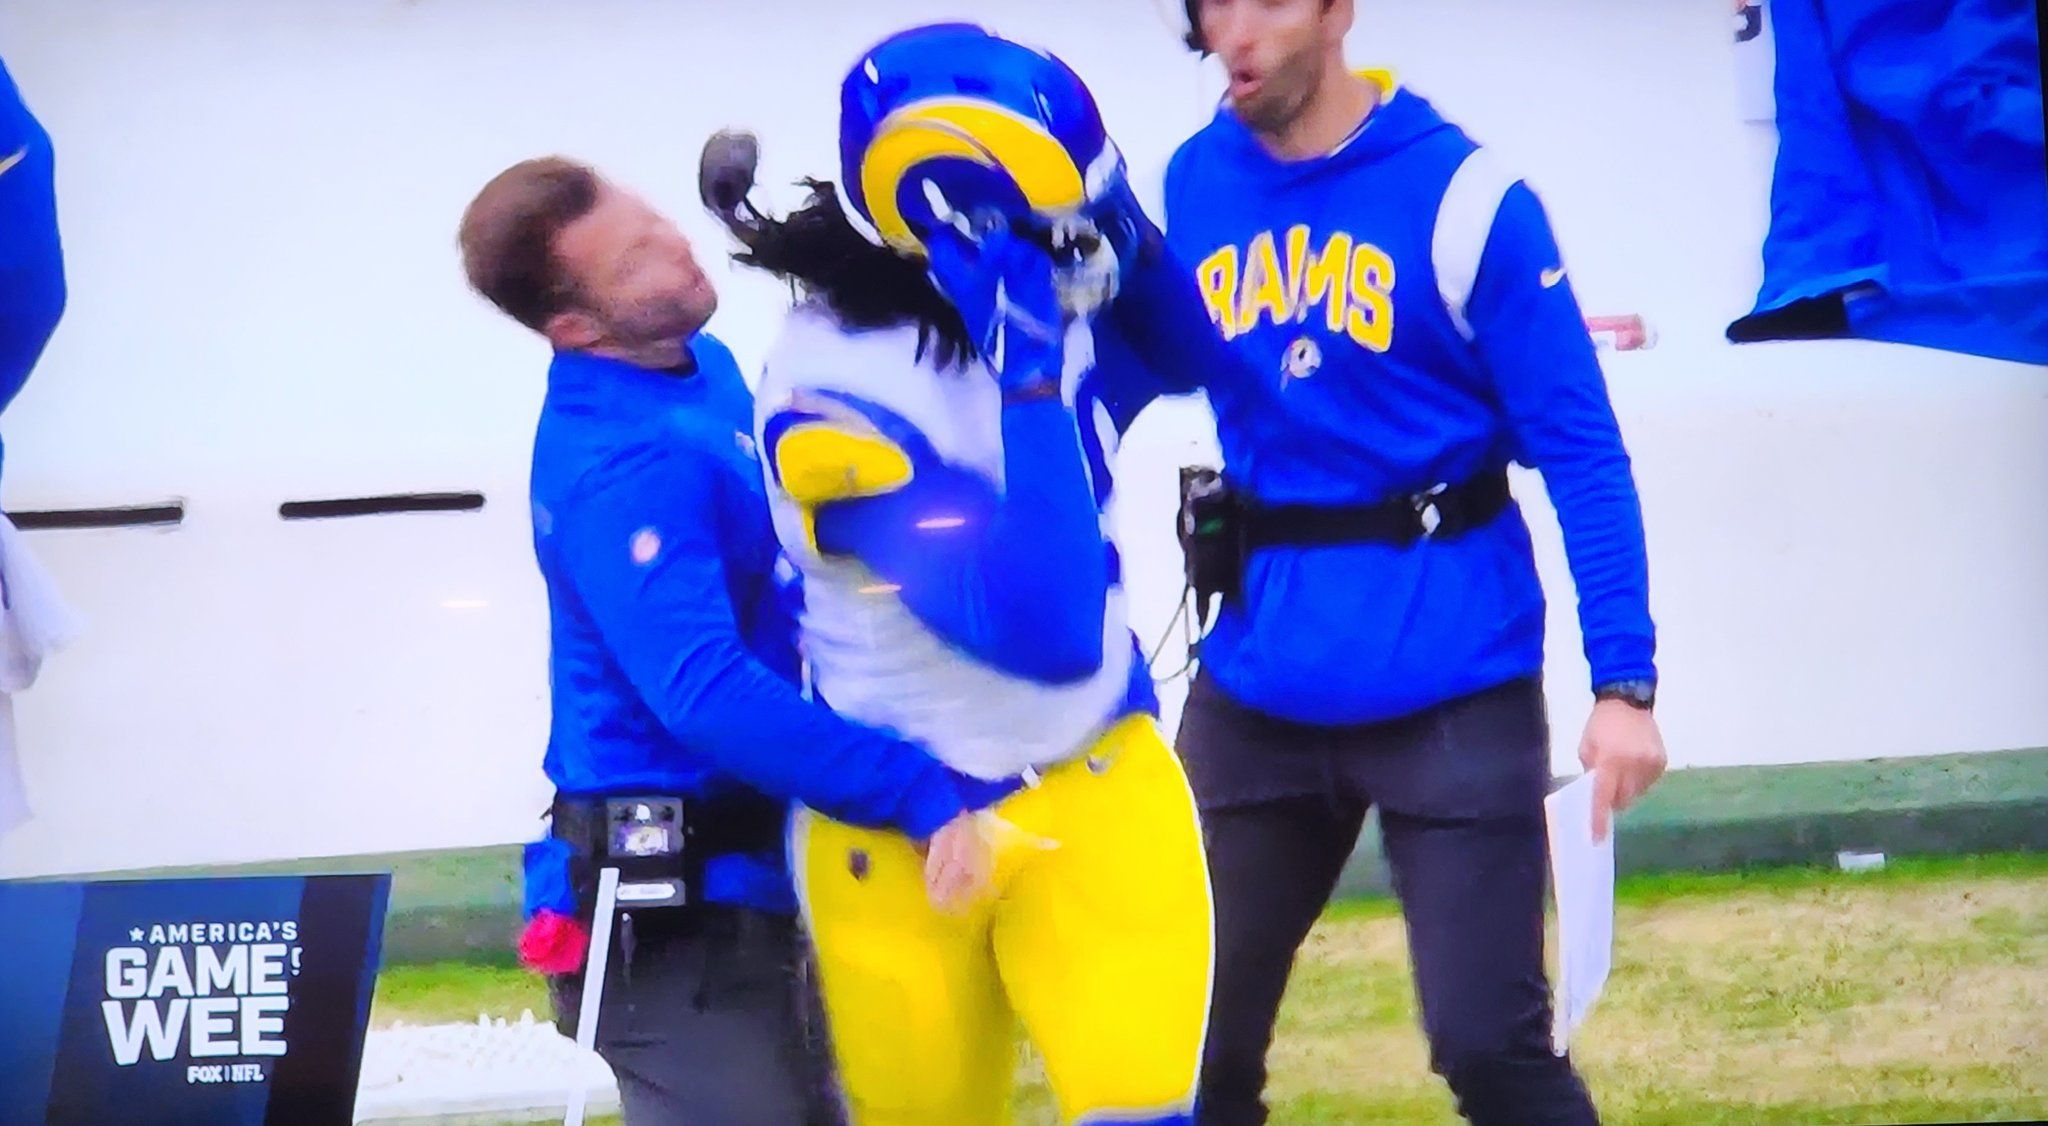 Los Angeles Rams’ Sean McVay hit by rookie Roger Carter’s helmet during game vs Kansas City Chiefs: Watch